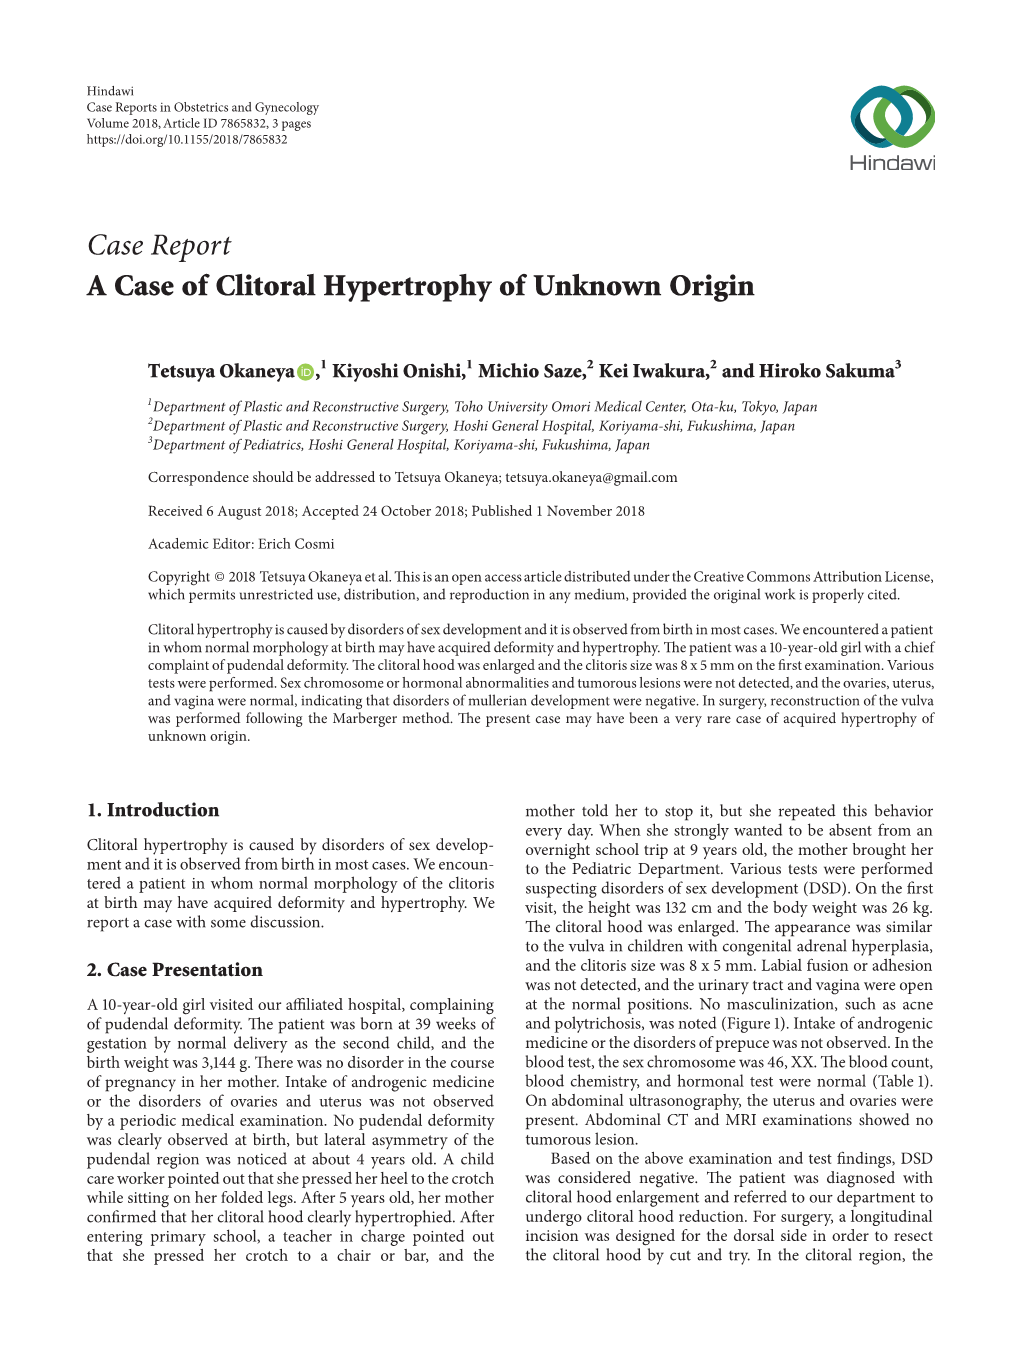 A Case of Clitoral Hypertrophy of Unknown Origin